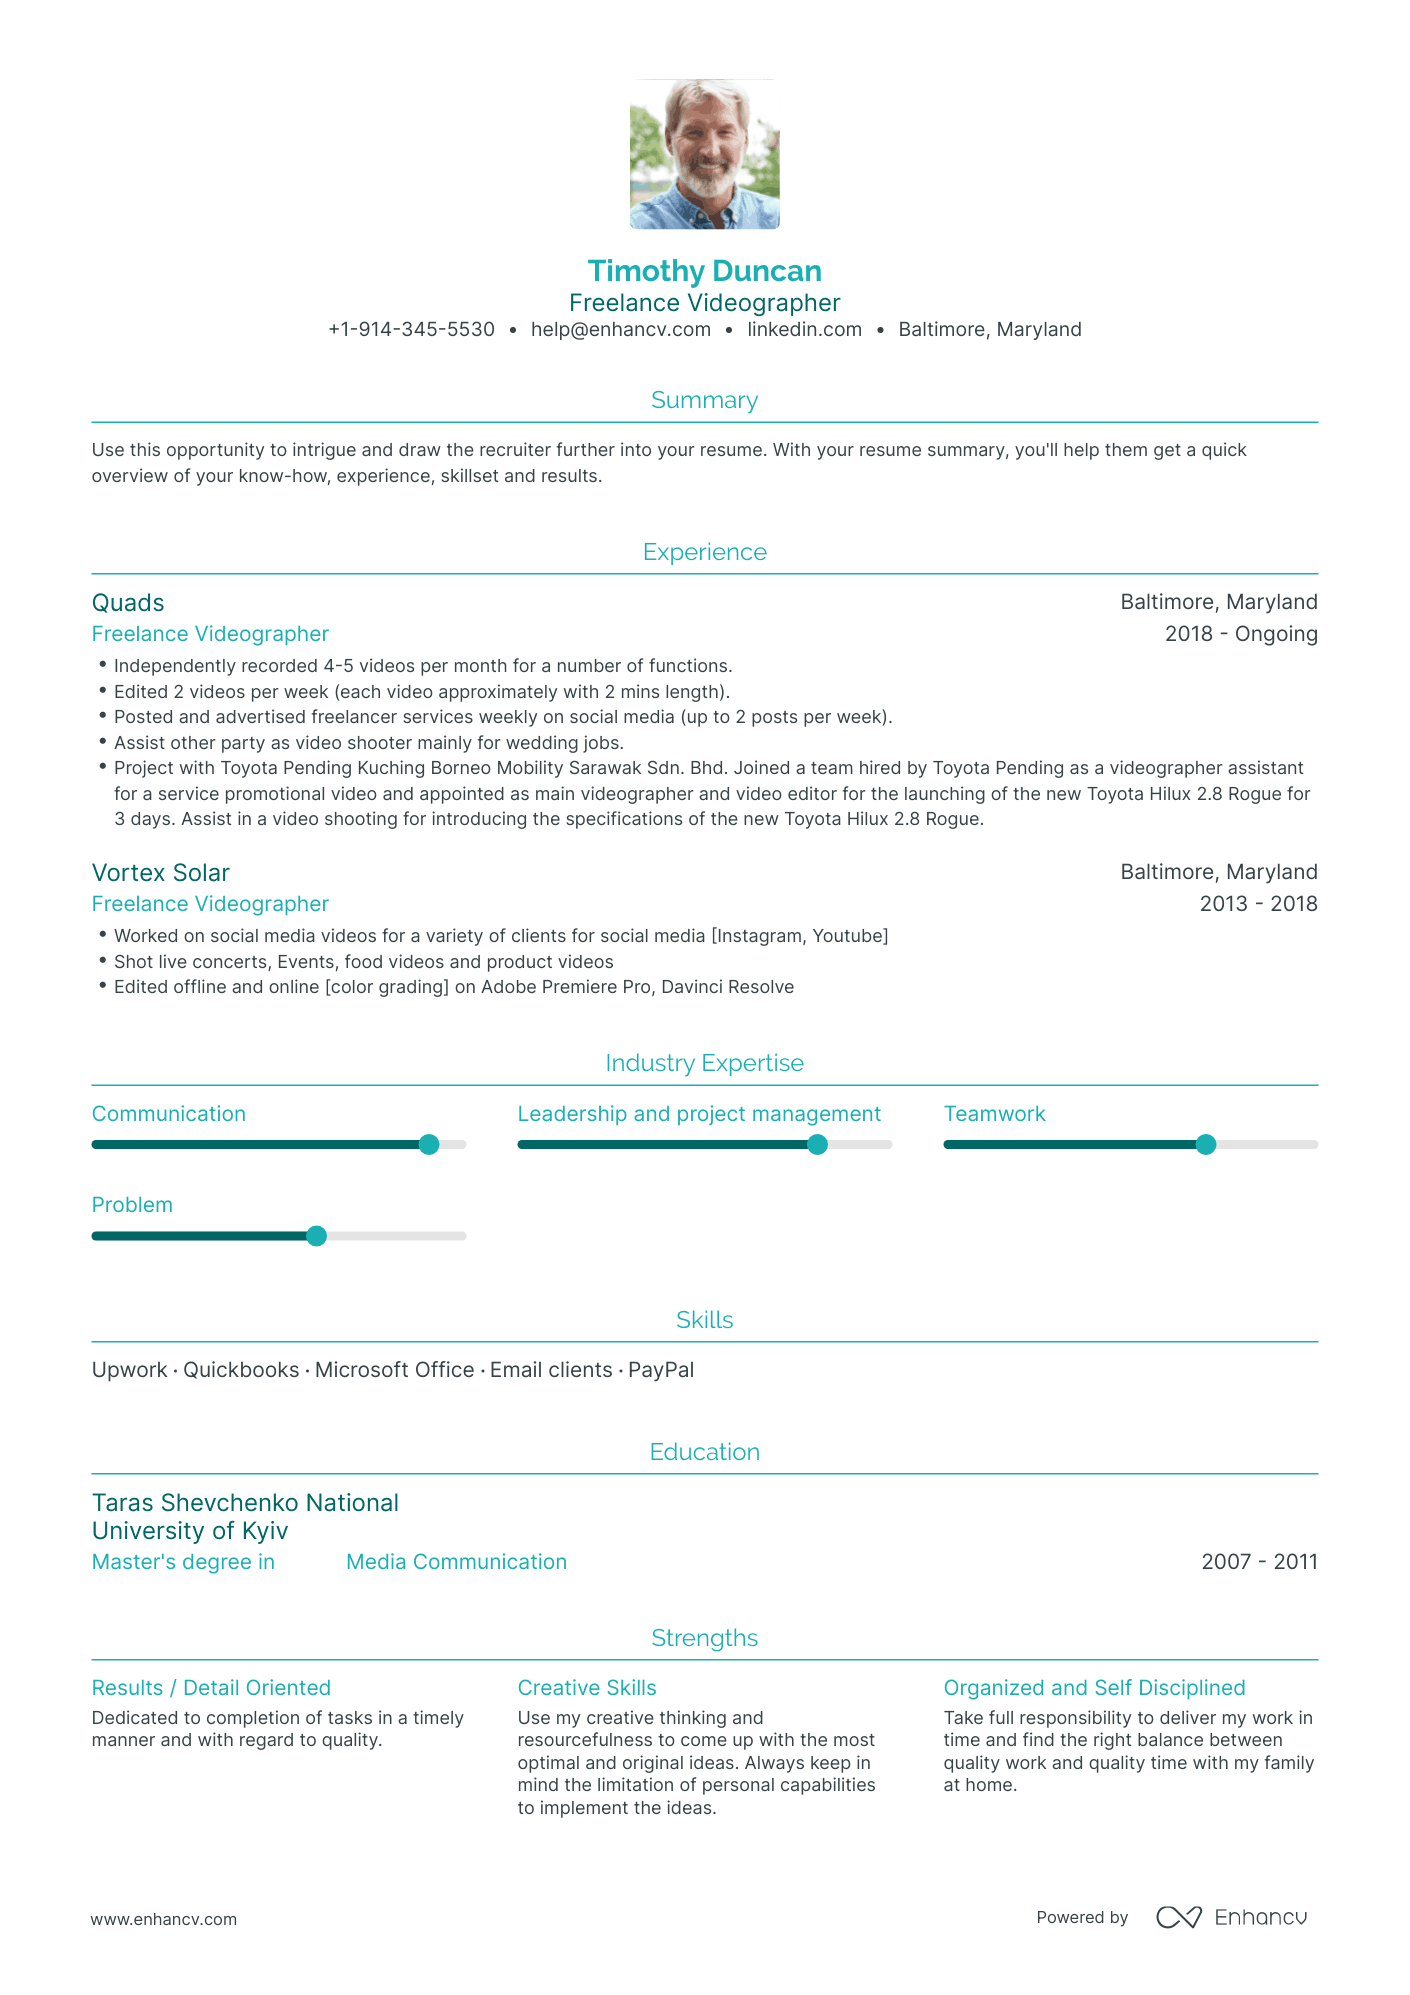 Traditional Freelance Videographer Resume Template